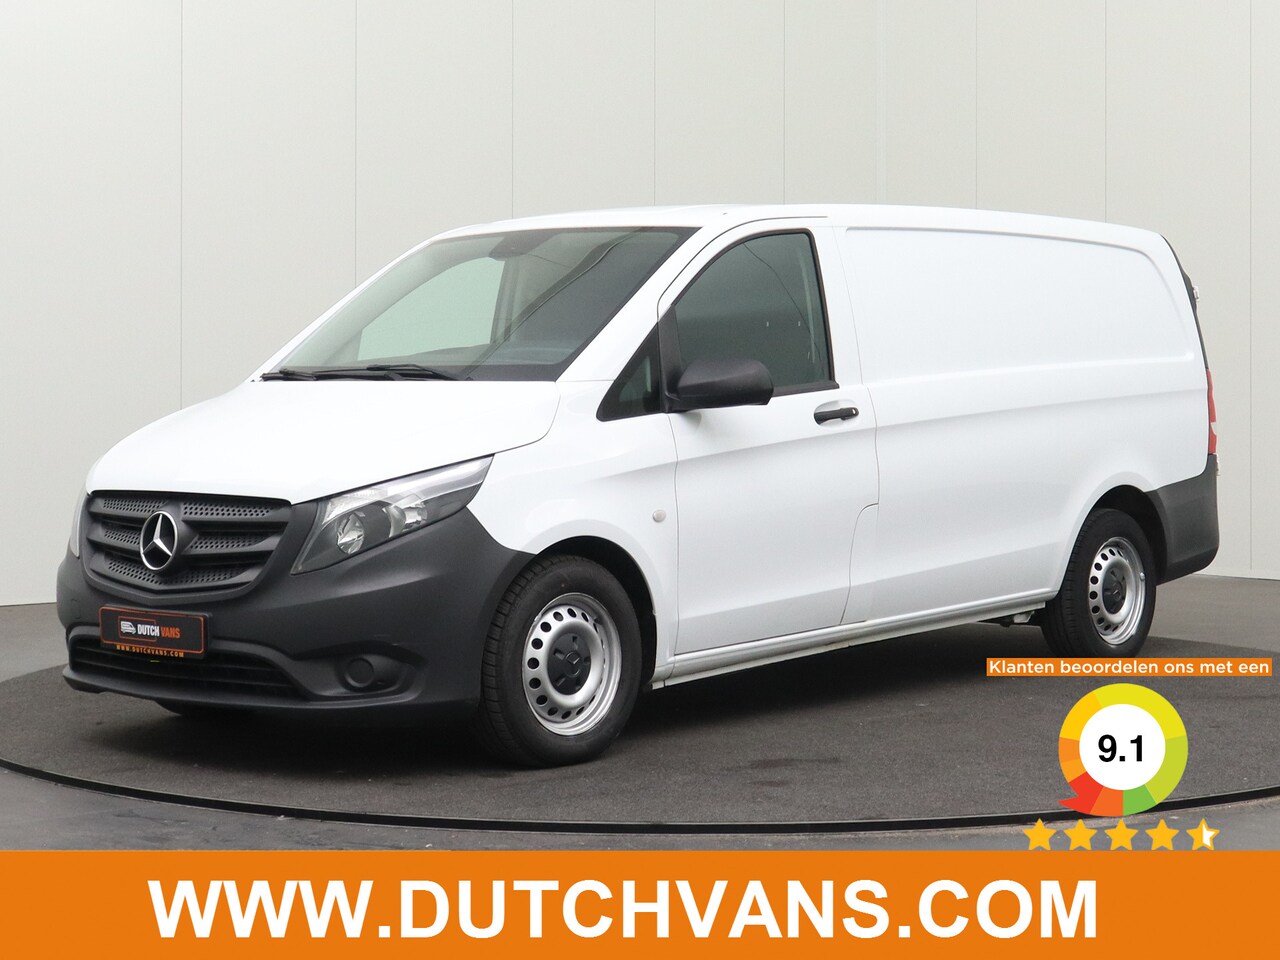 Mercedes-Benz Vito - 111CDI Lang Koelauto | Airco | Cruise | 3-Persoons - AutoWereld.nl